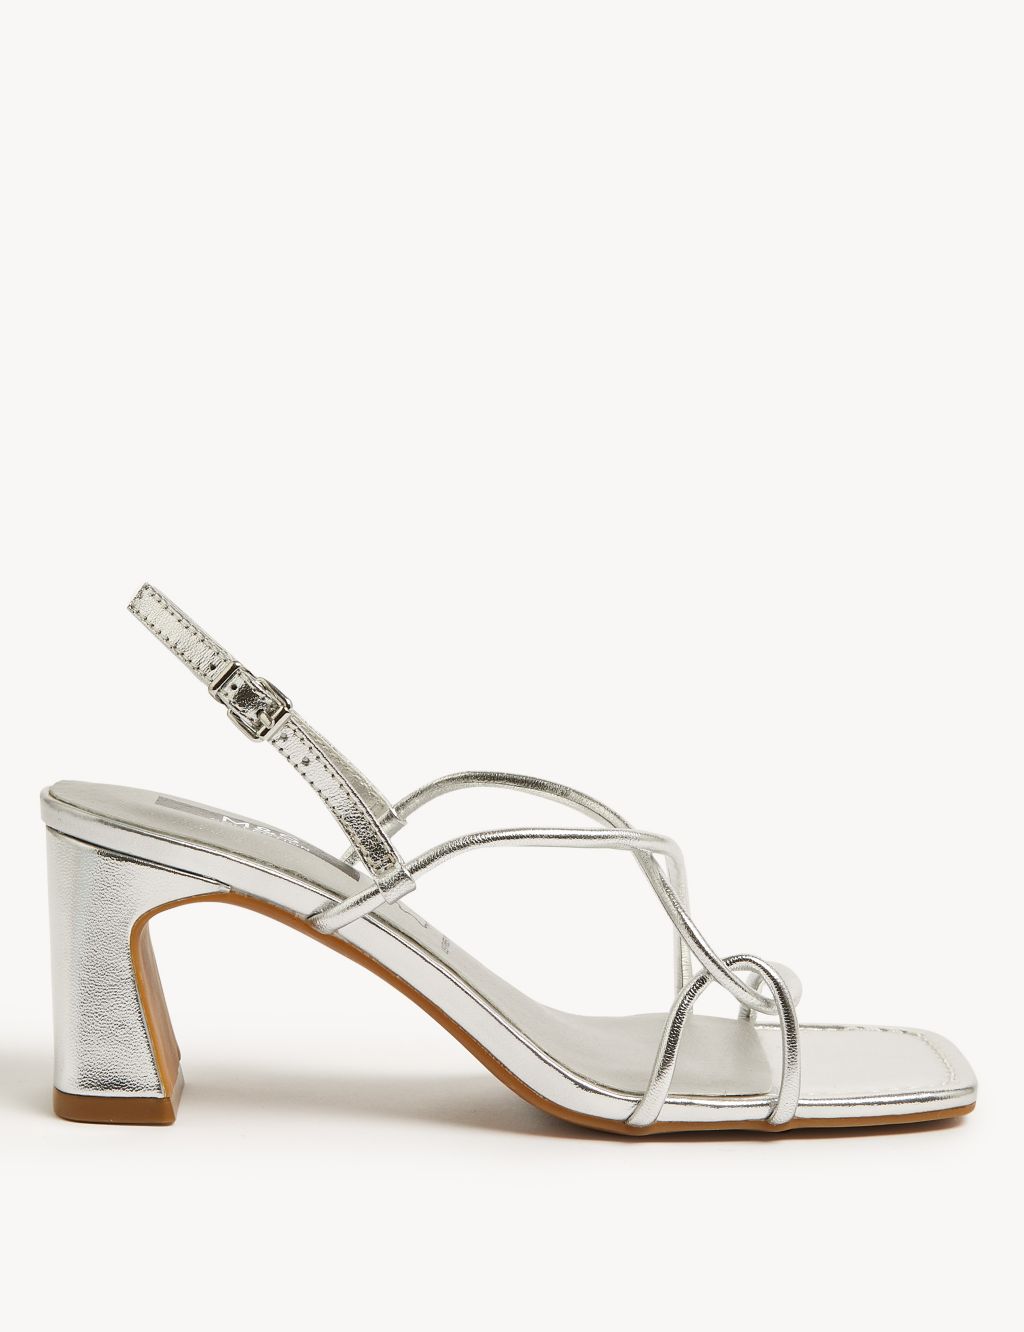 Leather Strappy Statement Sandals image 1